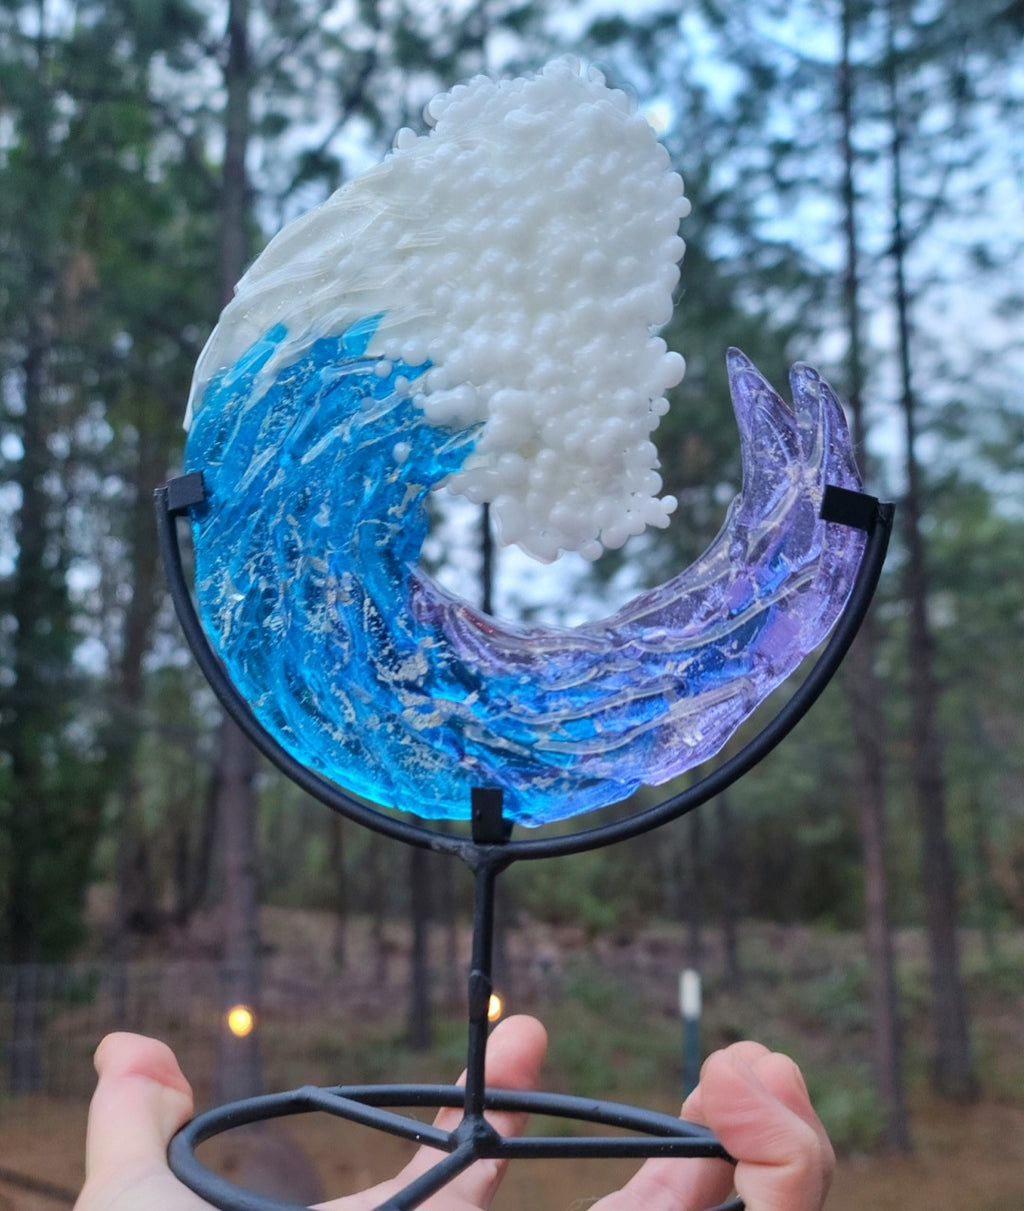 Ashes InFused Glass Cremation Art 3D Ocean Wave 5in Rod Iron Table Display Memorial